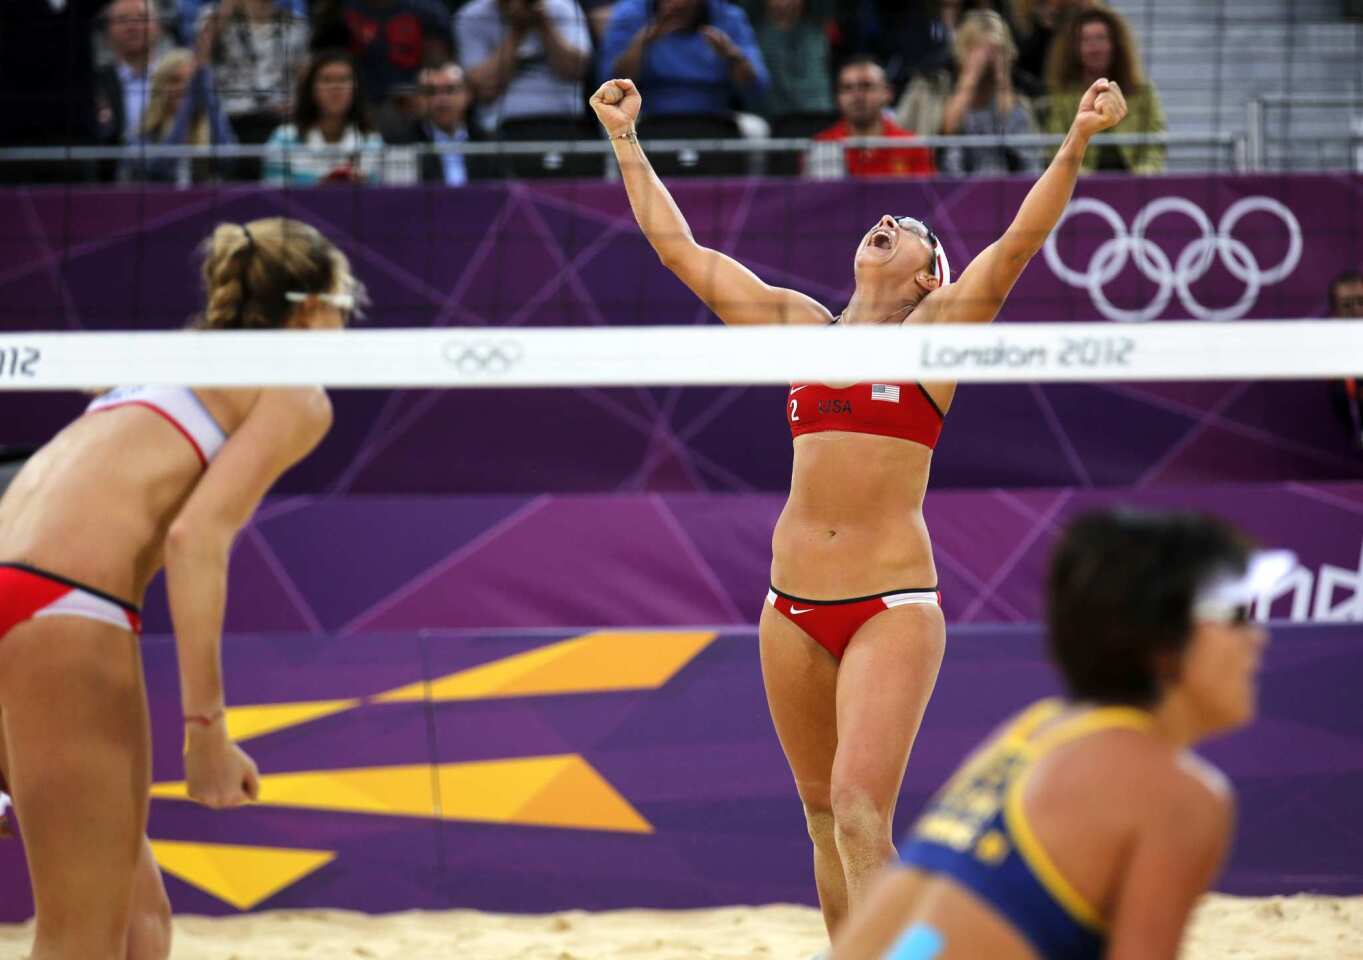 United States' Misty May-Treanor celebrates the final point and victory as the U.S. beat China in beach volleyball.